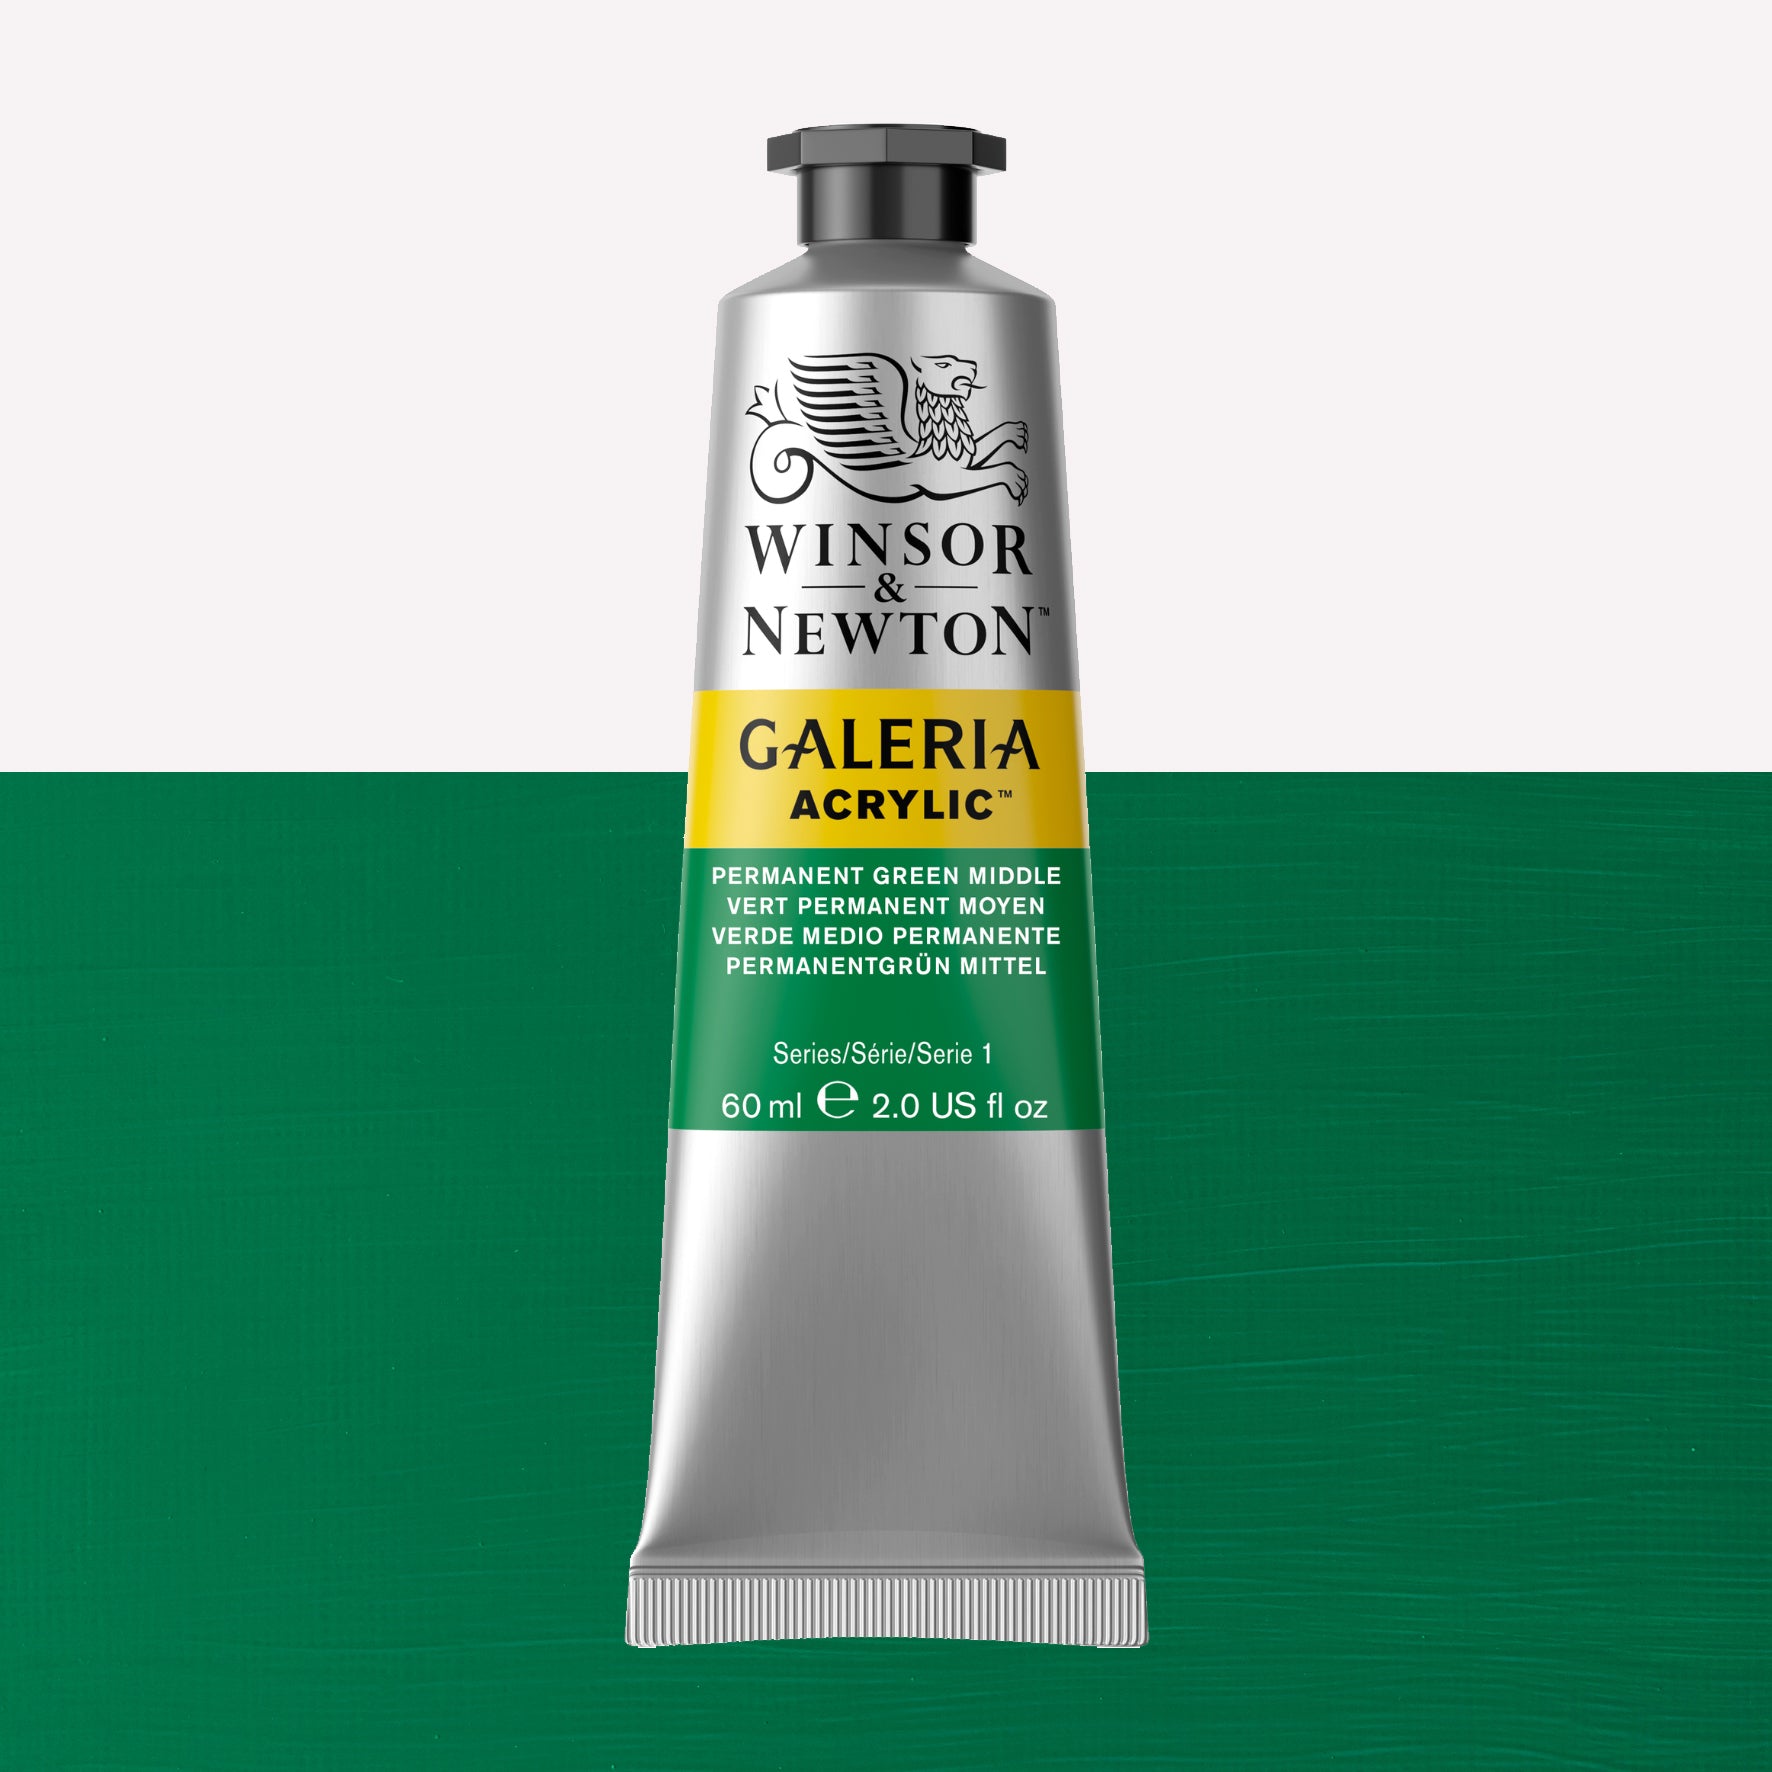 A 60ml tube of vibrant Galeria Acrylic paint in the shade Permanent Green Middle. This professional-quality paint is packaged in a silver tube with a black lid. Made by Winsor and Newton.